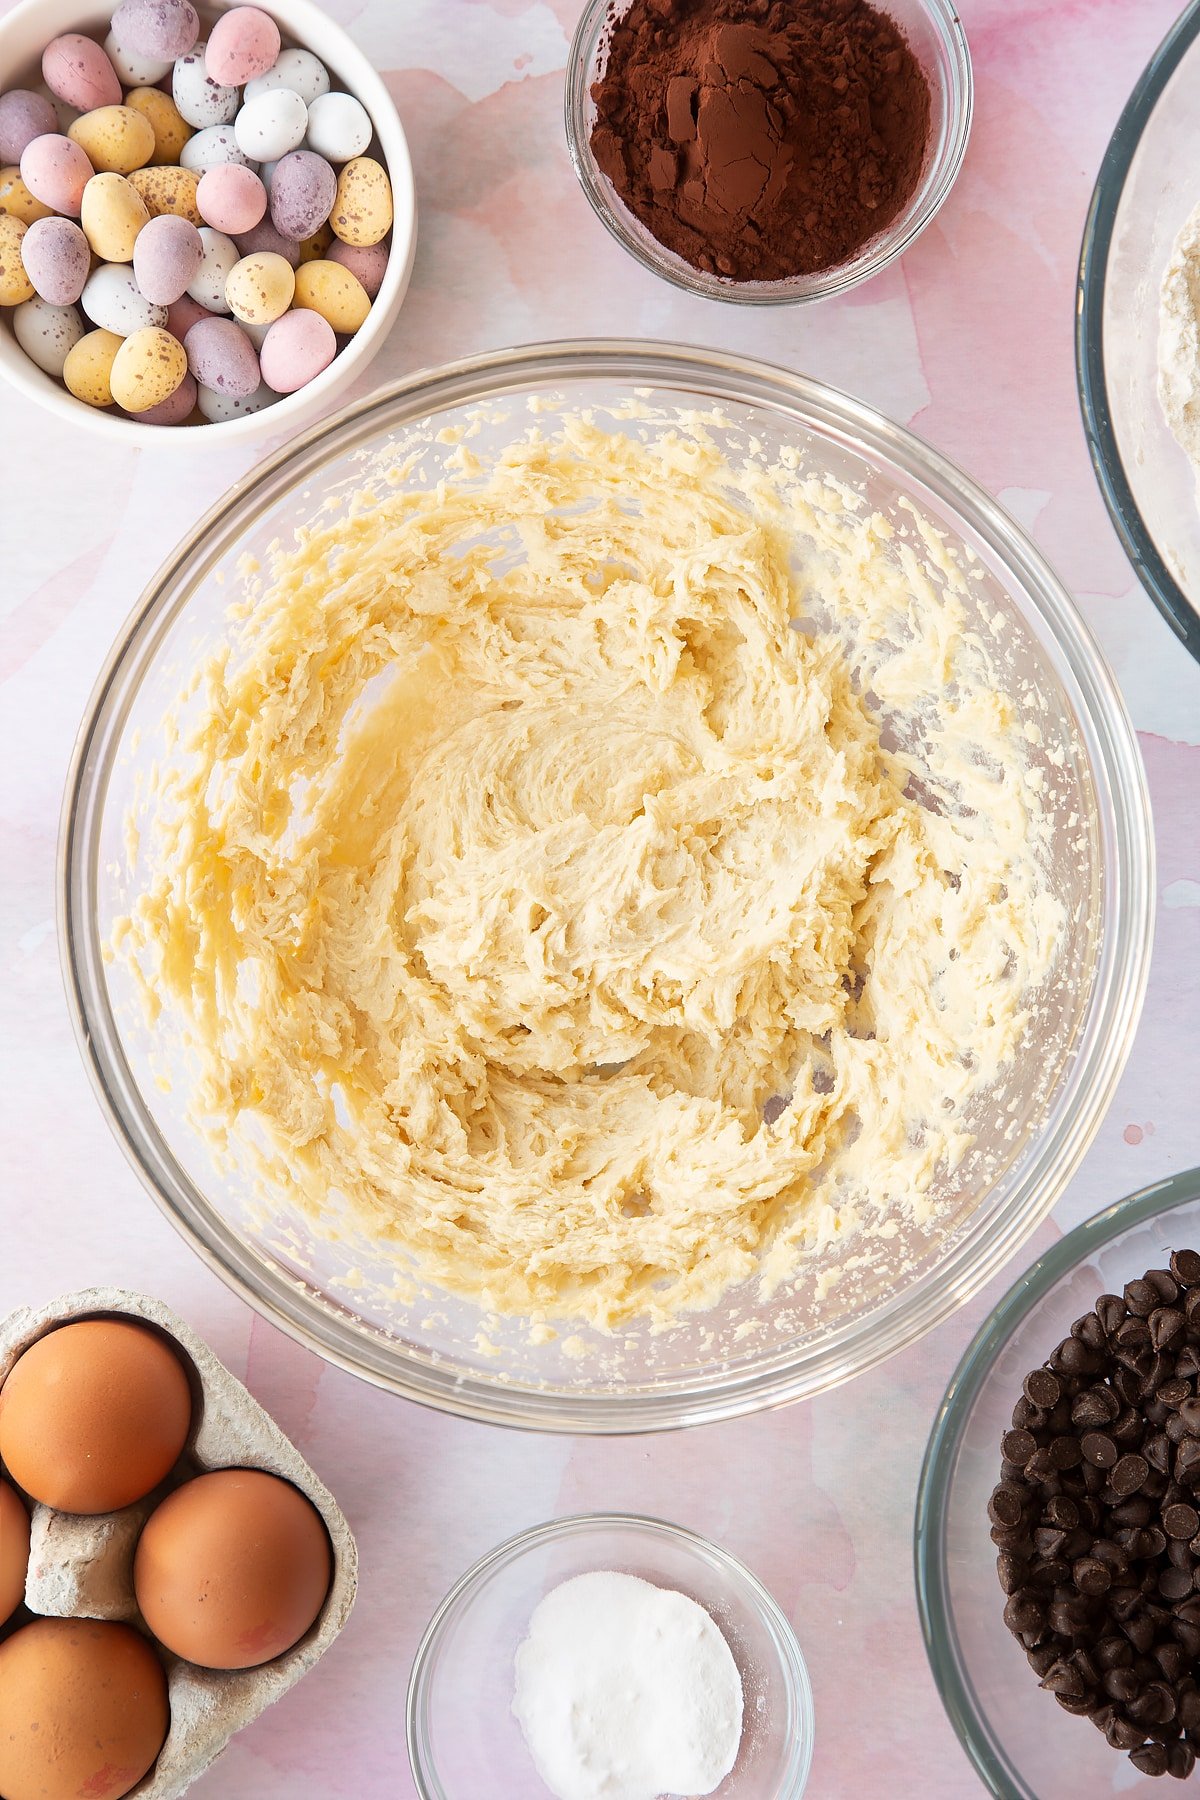 Butter, golden granulated sugar and egg beaten together in a bowl. Ingredients to make Chocolate Easter cookies surround the bowl.